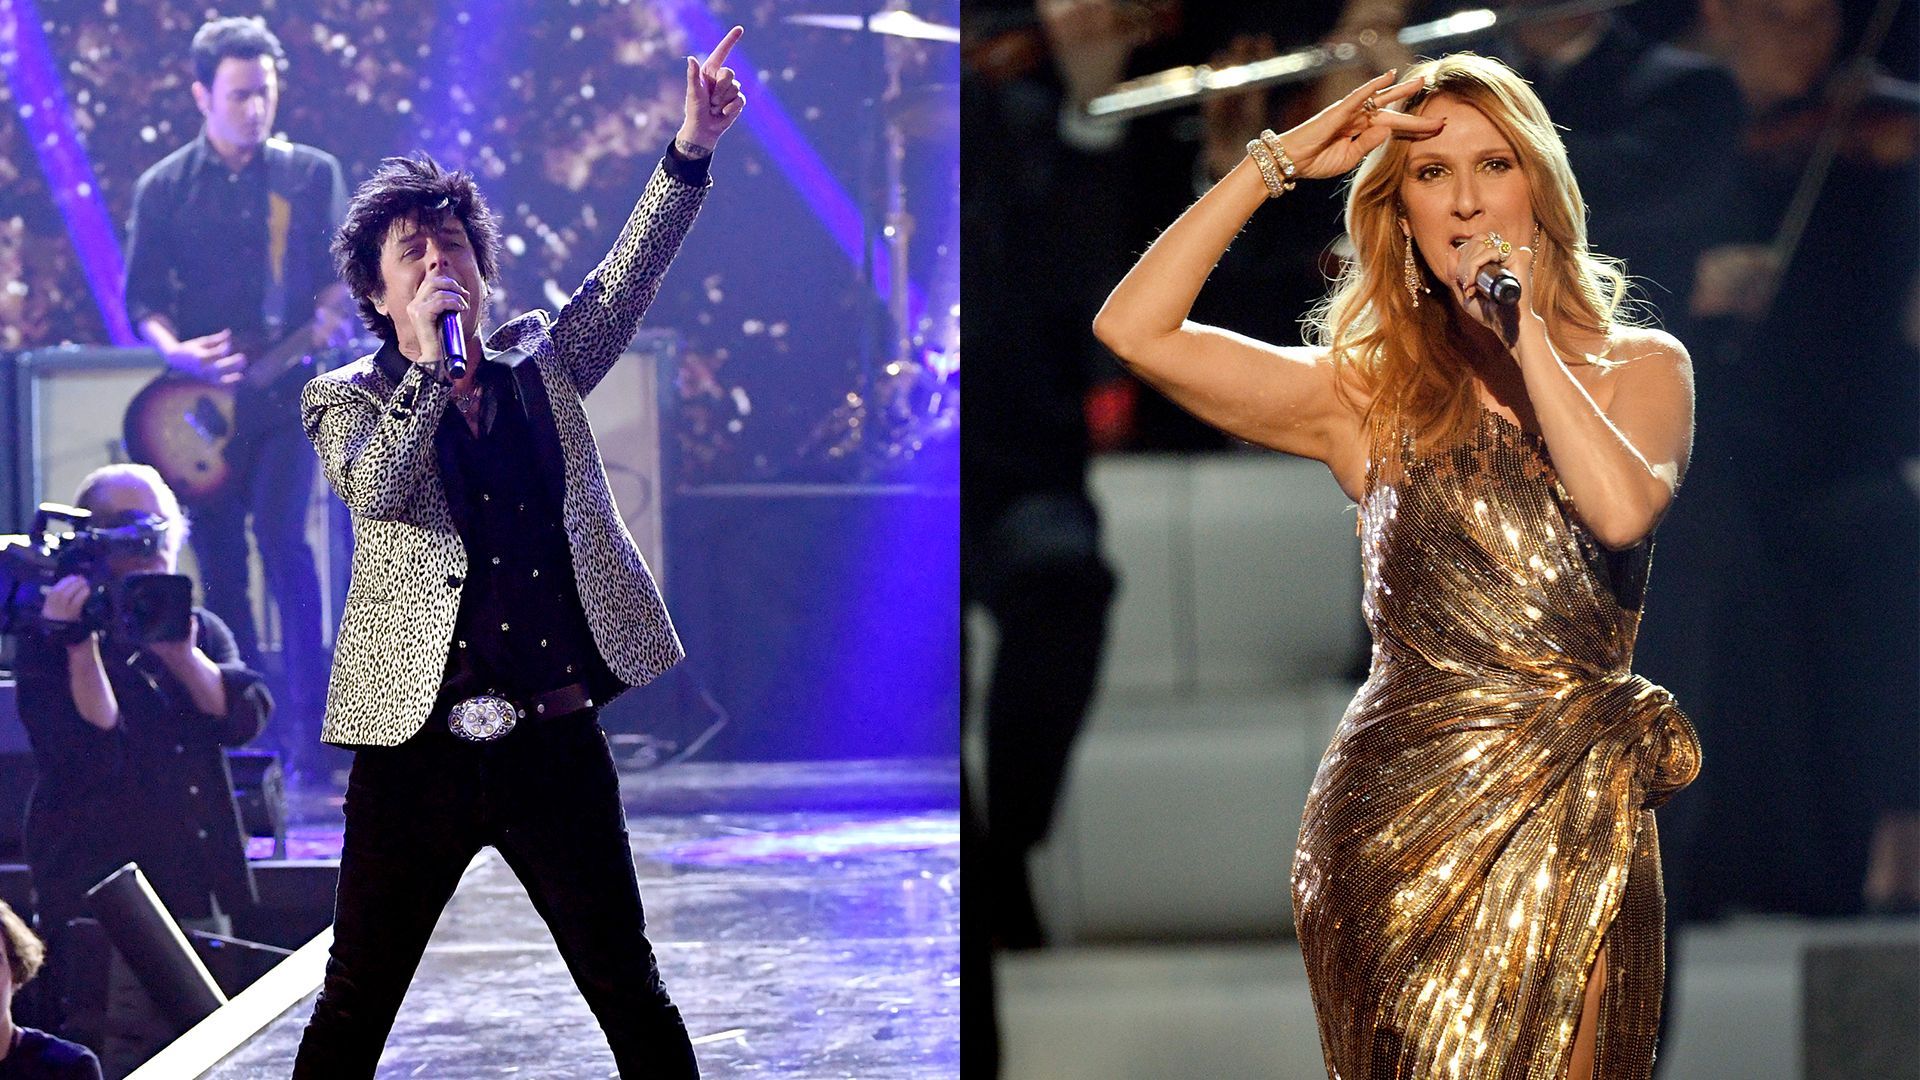 [Zapping 21] Quand Green Day rencontre Céline Dion